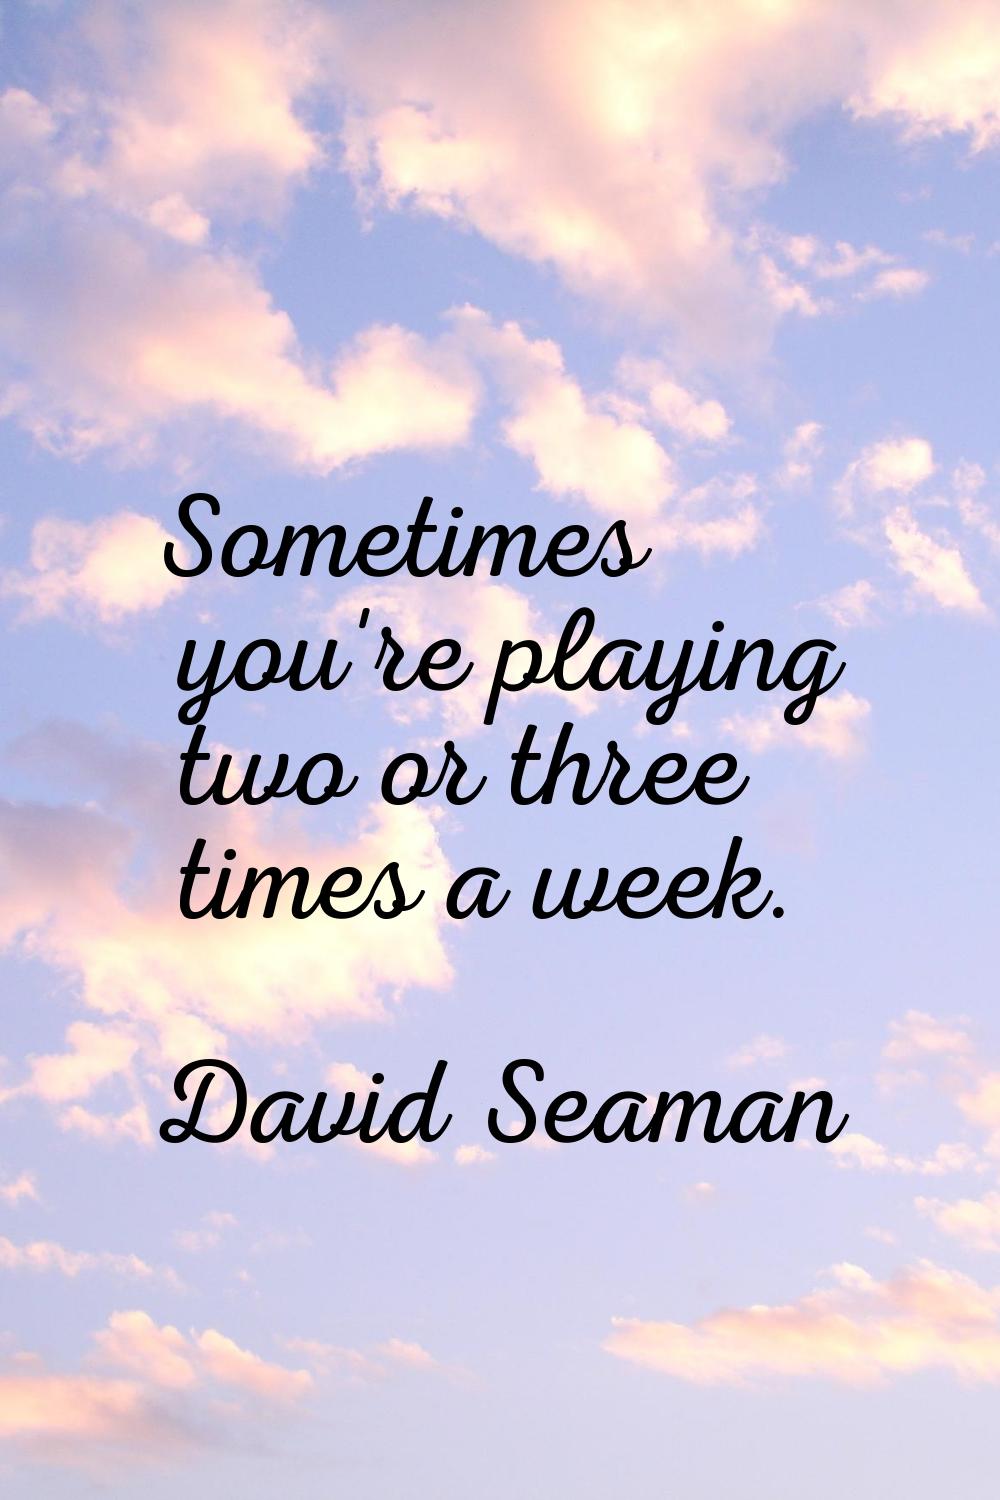 Sometimes you're playing two or three times a week.